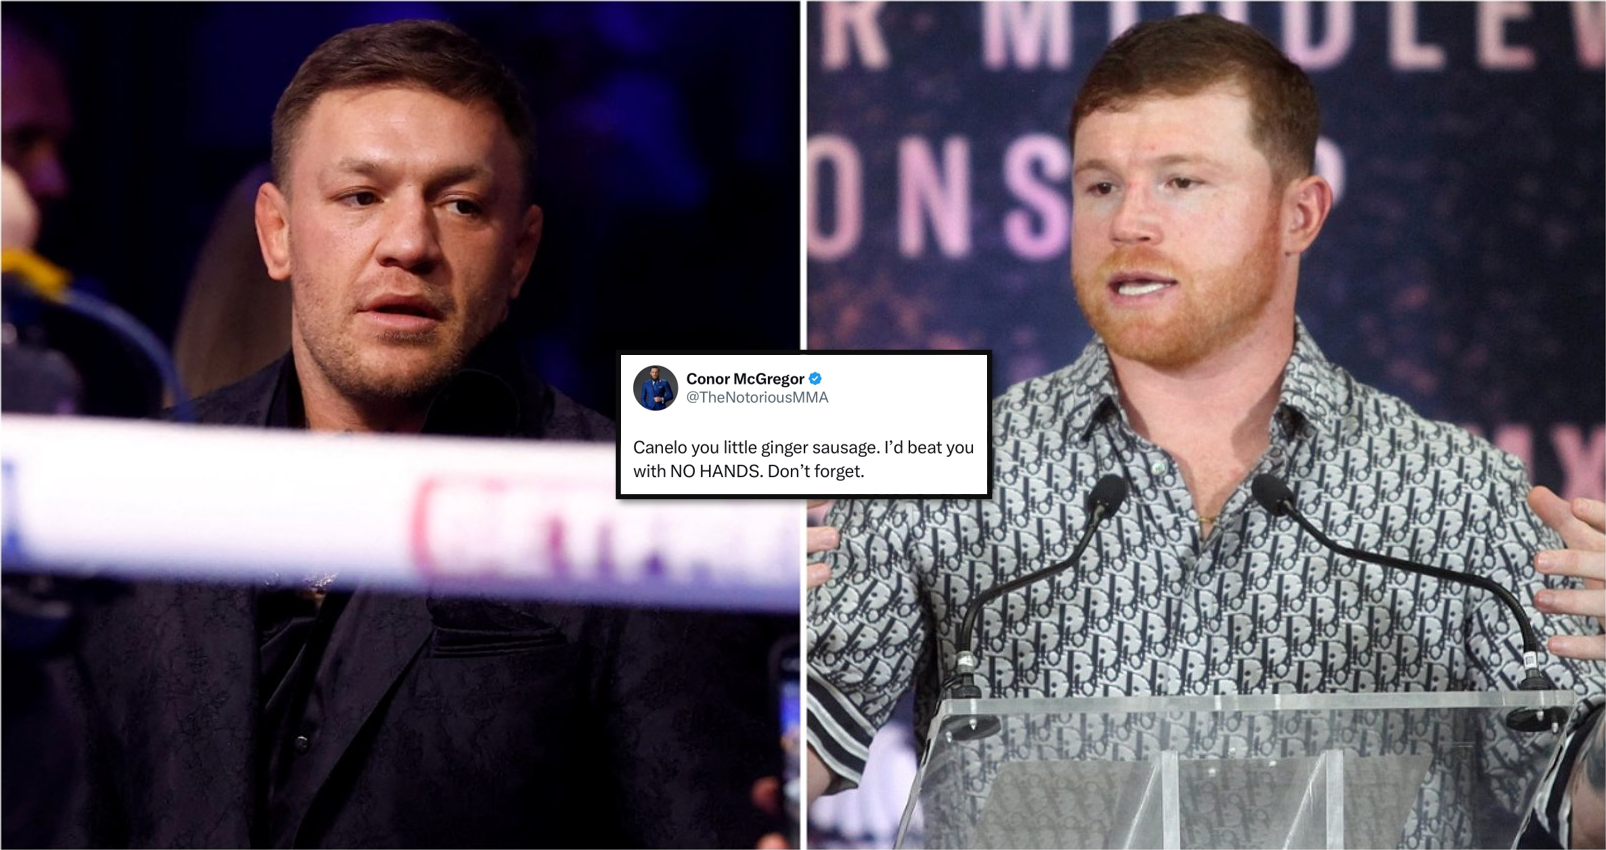 Conor McGregor's 13-word response to Canelo saying he'd beat him with one hand